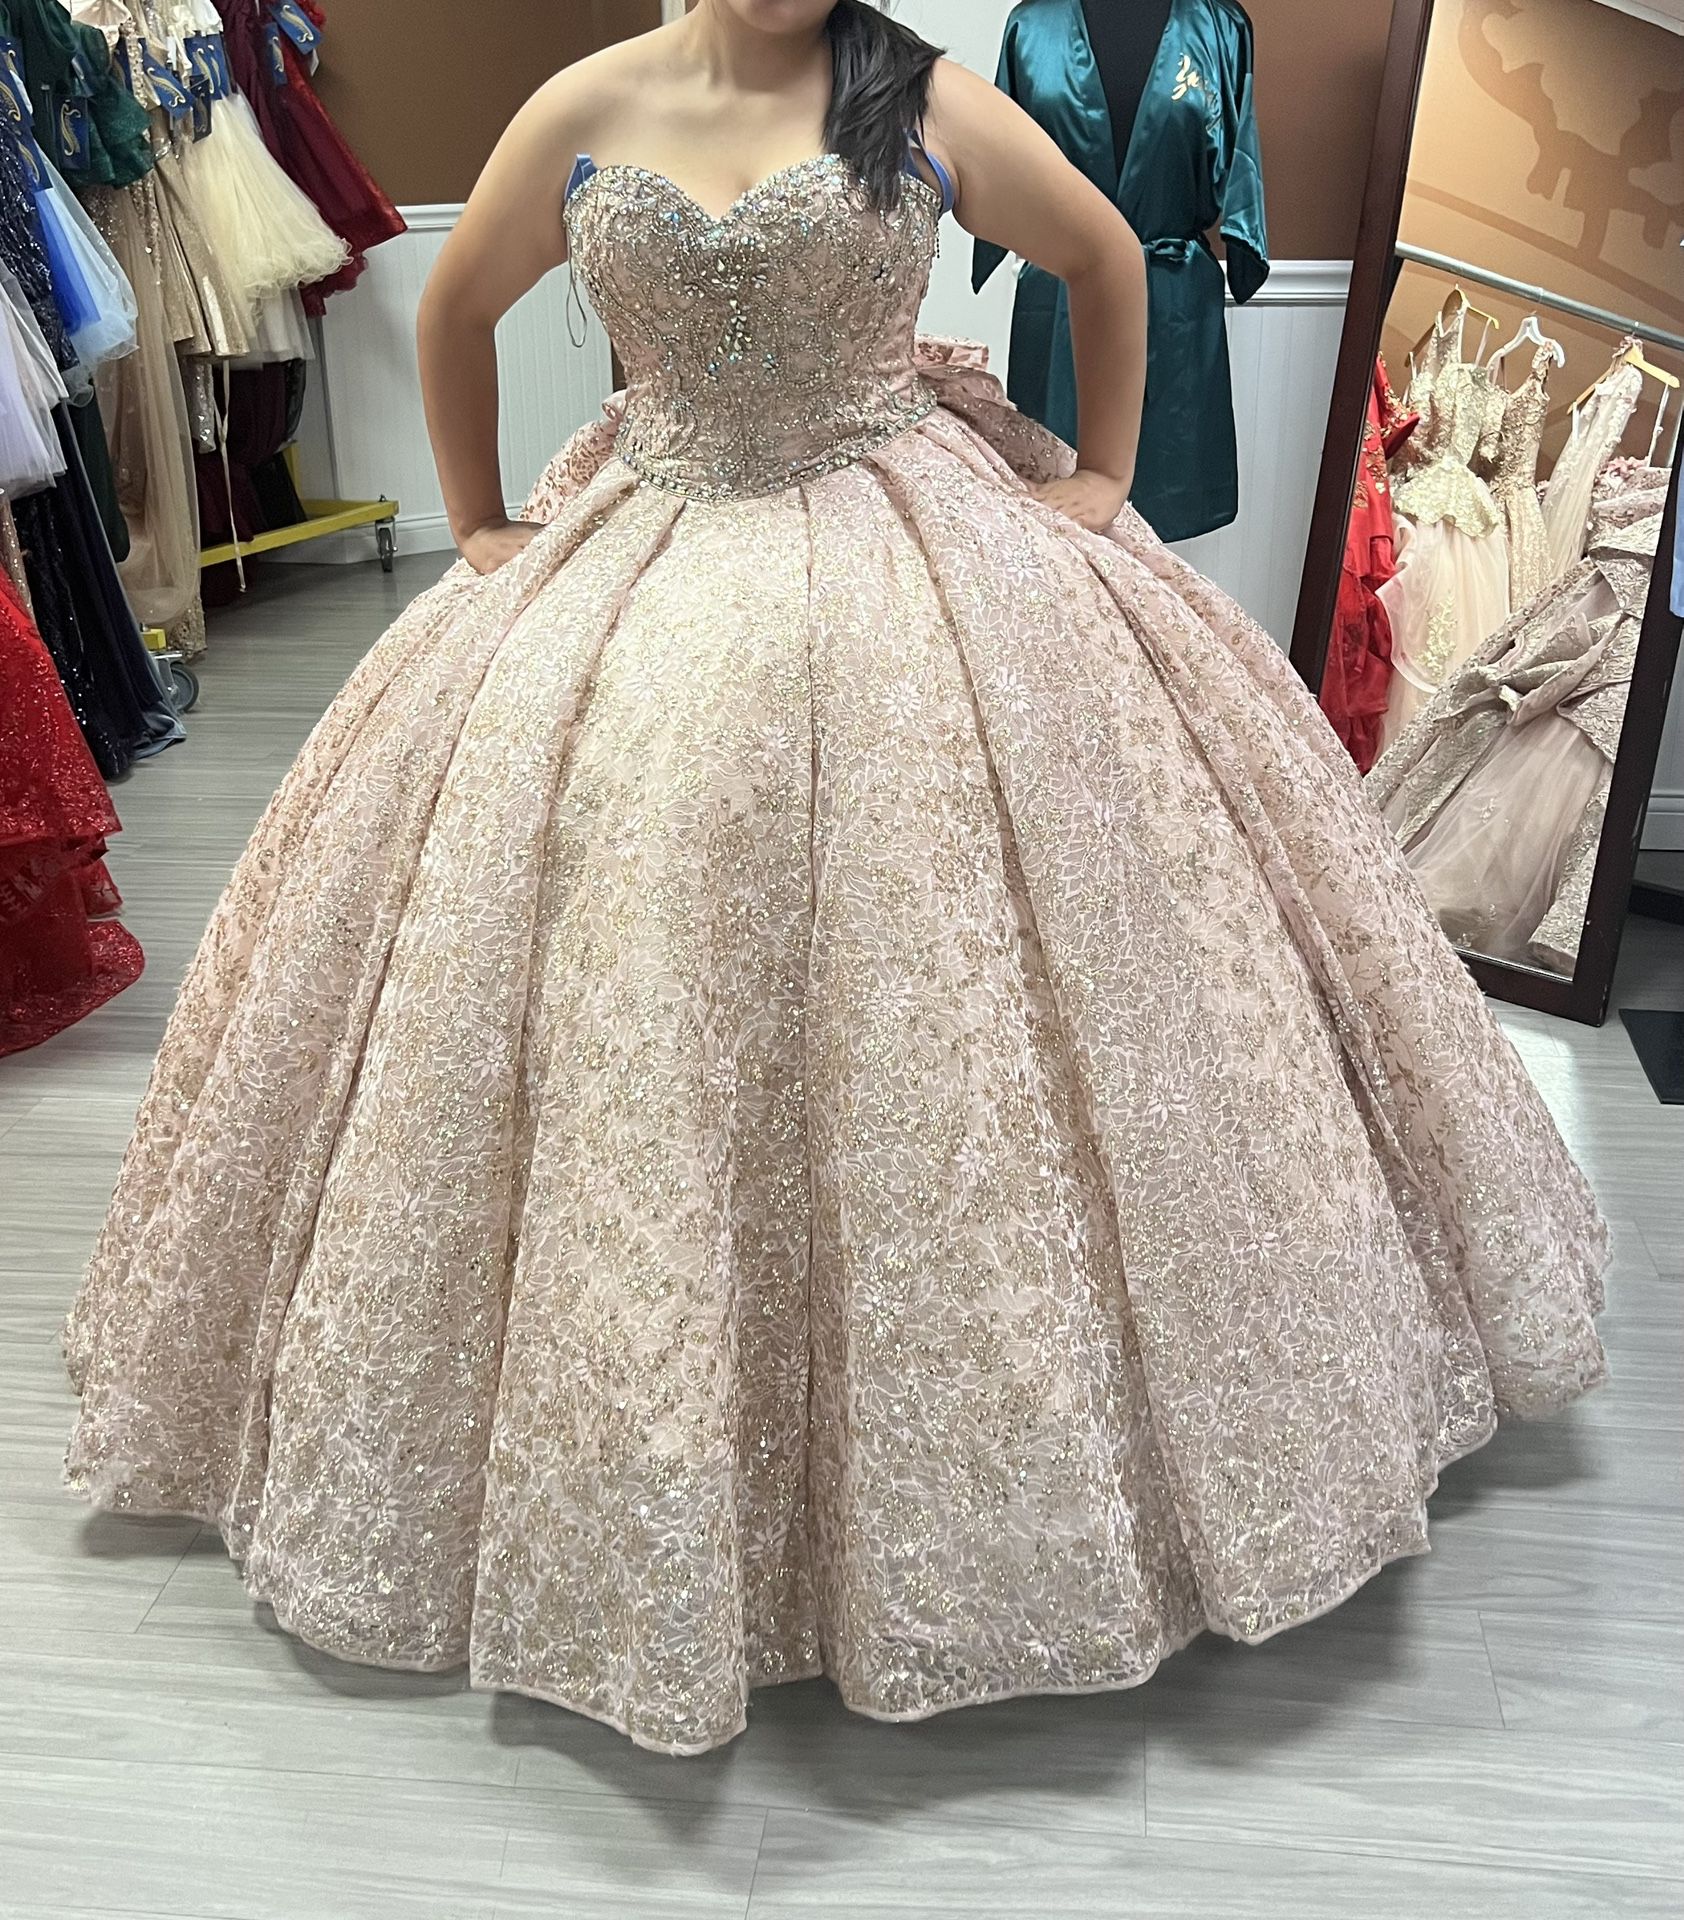 Quinceanera Dress And Items. 